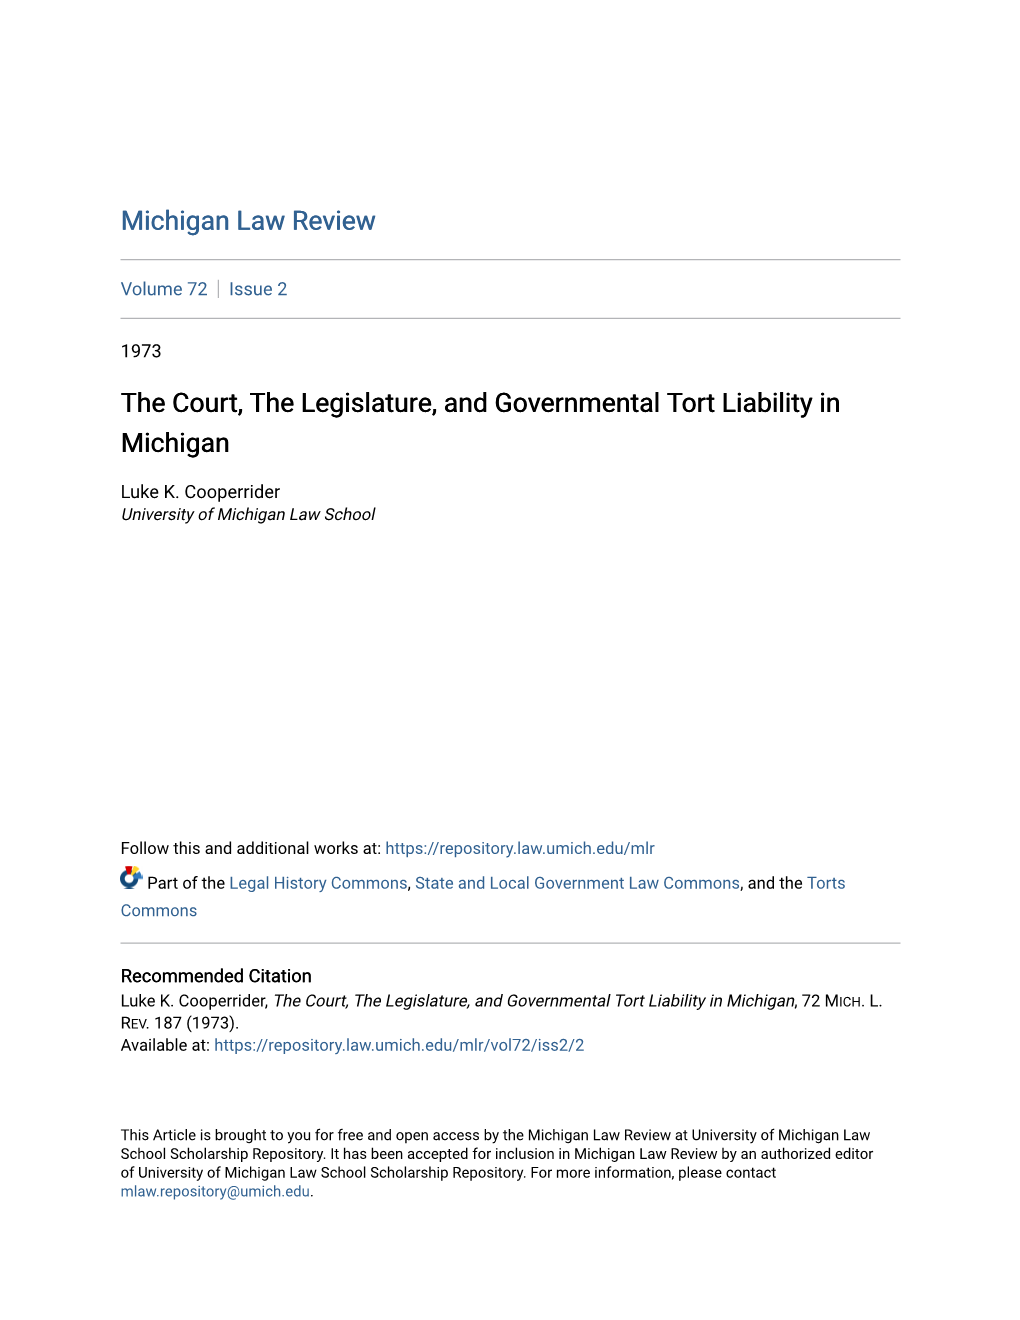 The Court, the Legislature, and Governmental Tort Liability in Michigan